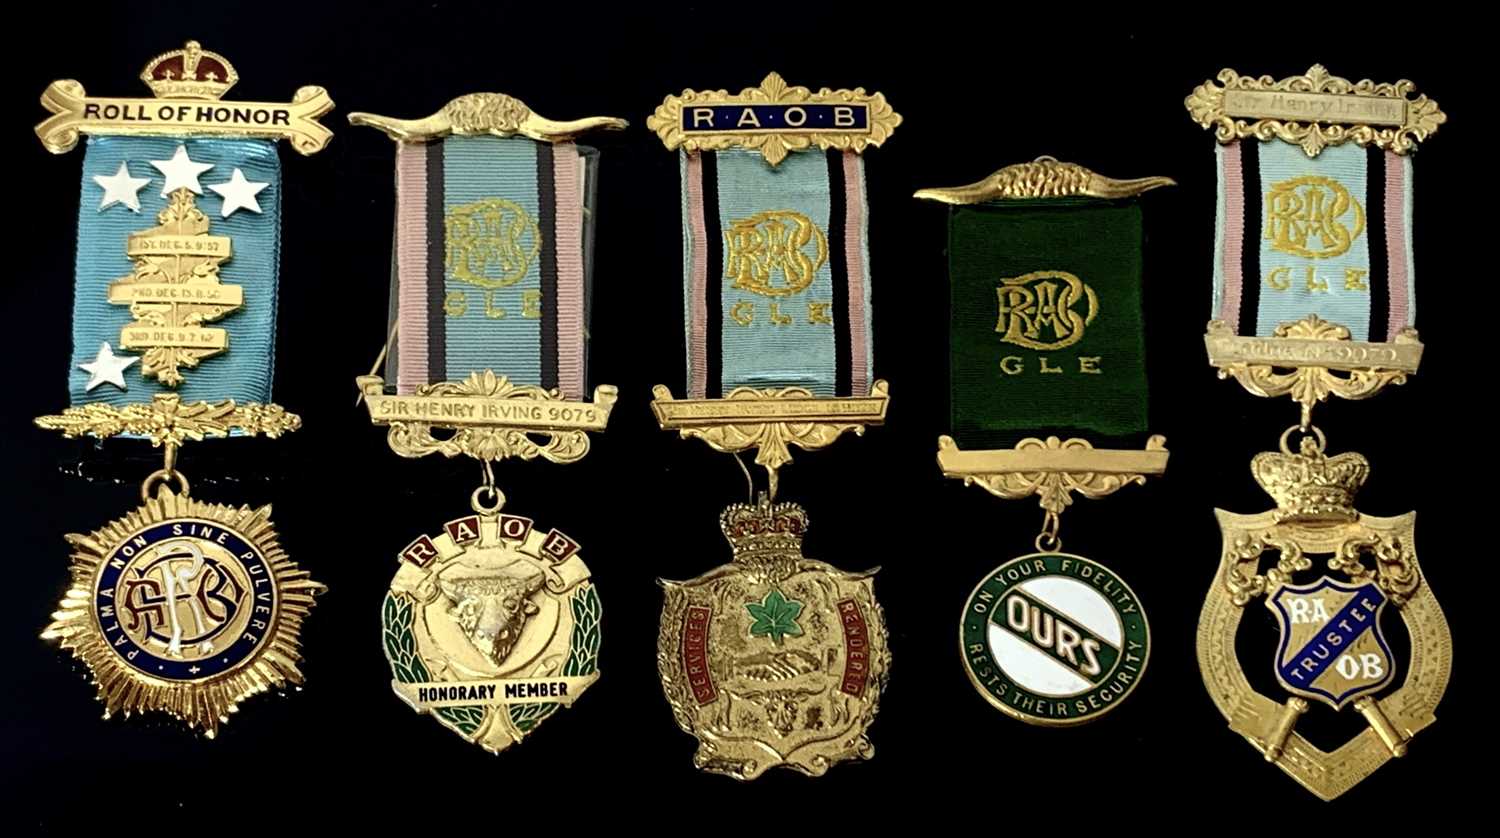 RAOB Medals - group of 5 to G.Ware 1960's - 1990's, 4 silver Sir Henry Irvine Lodge.